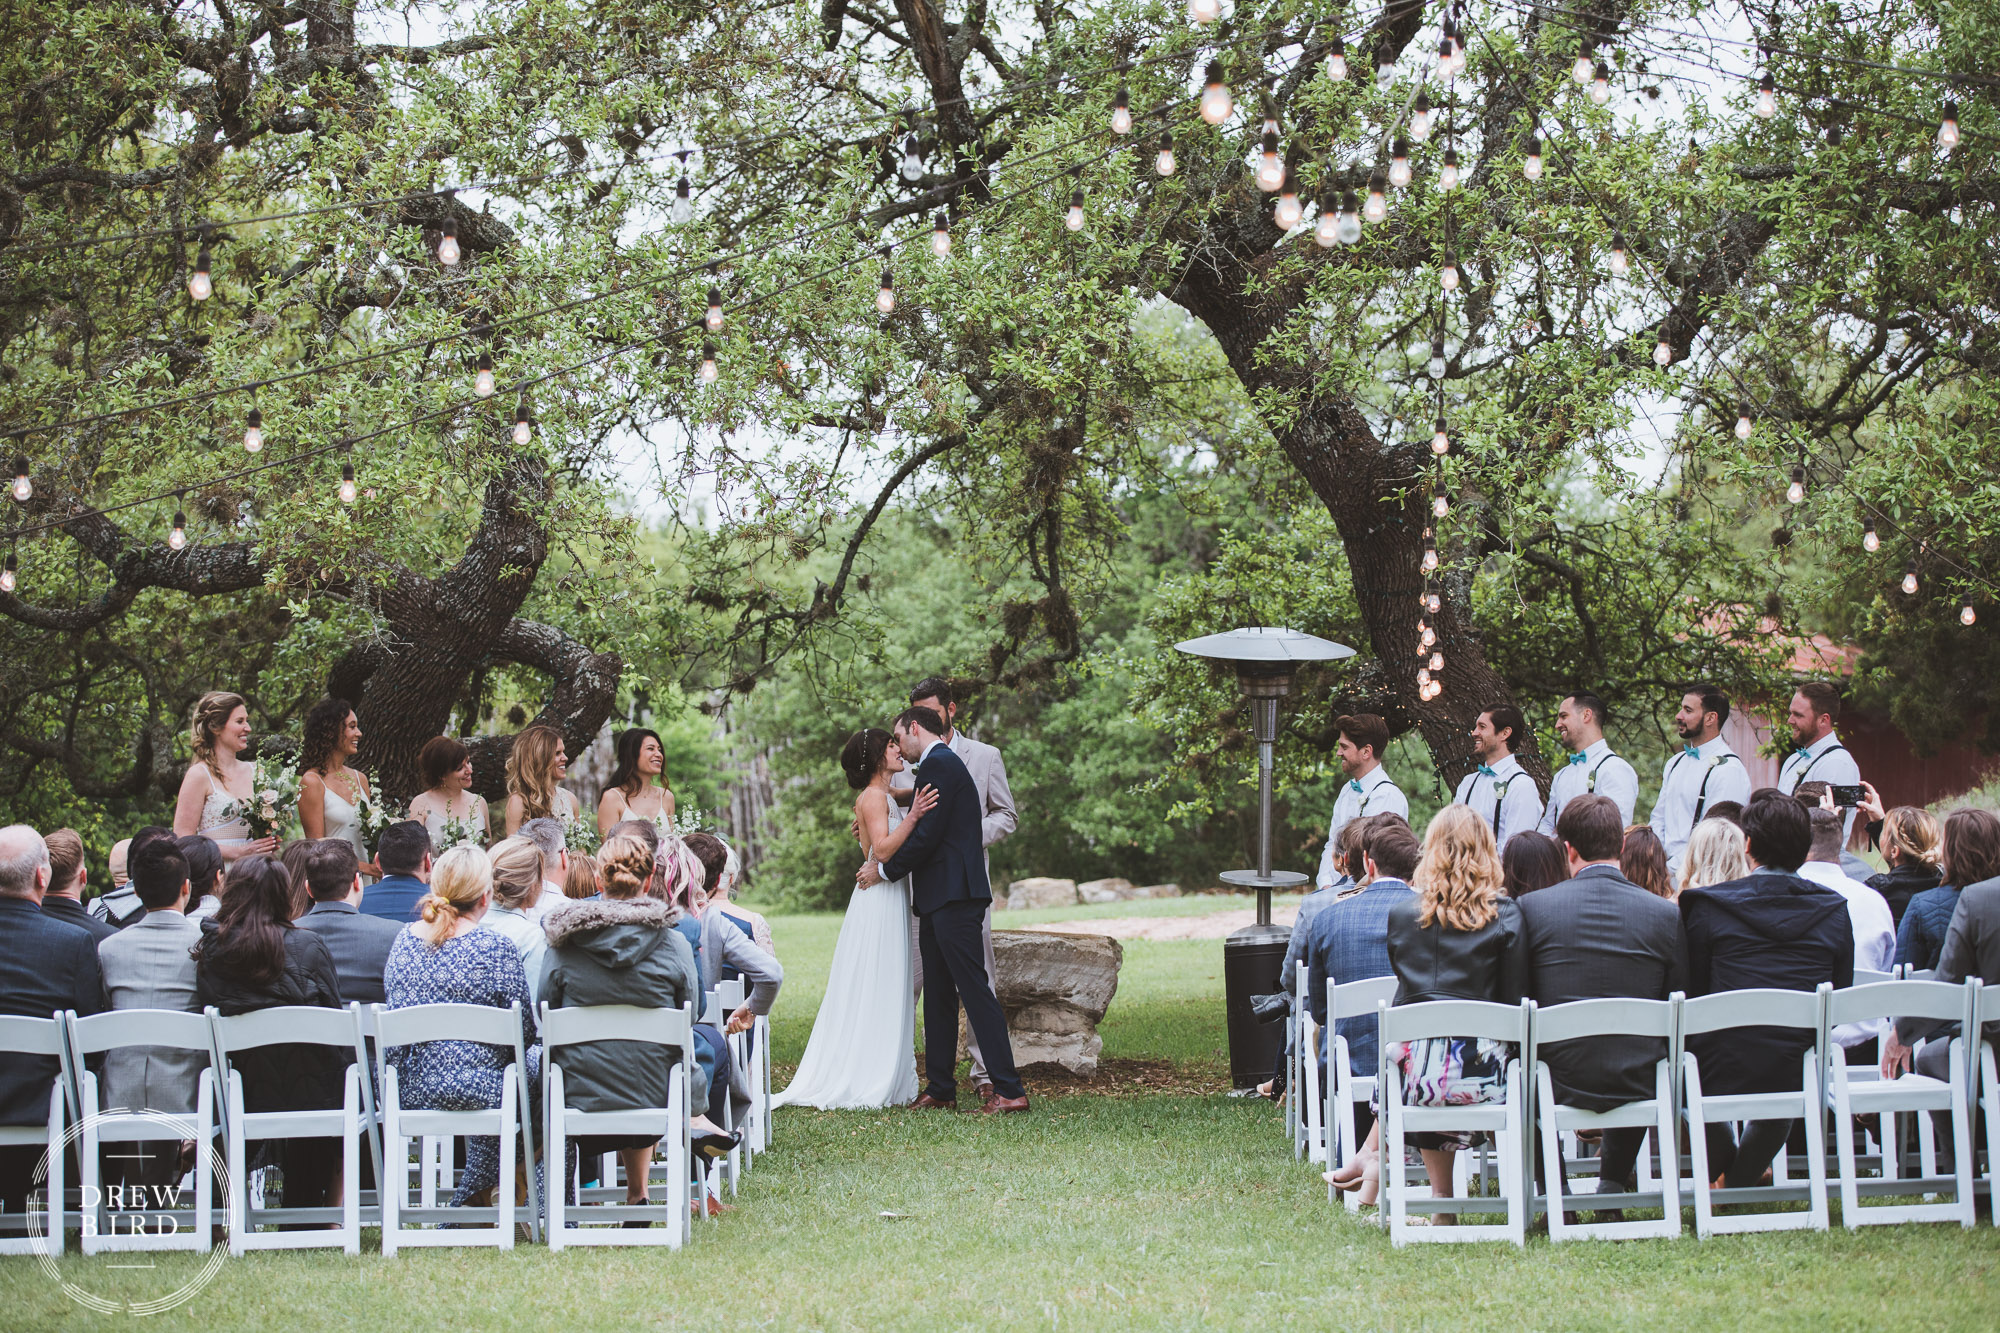 Bride and groom kiss during wedding ceremony under trees. Austin Texas ranch wedding. Outdoor rustic ranch wedding photography.